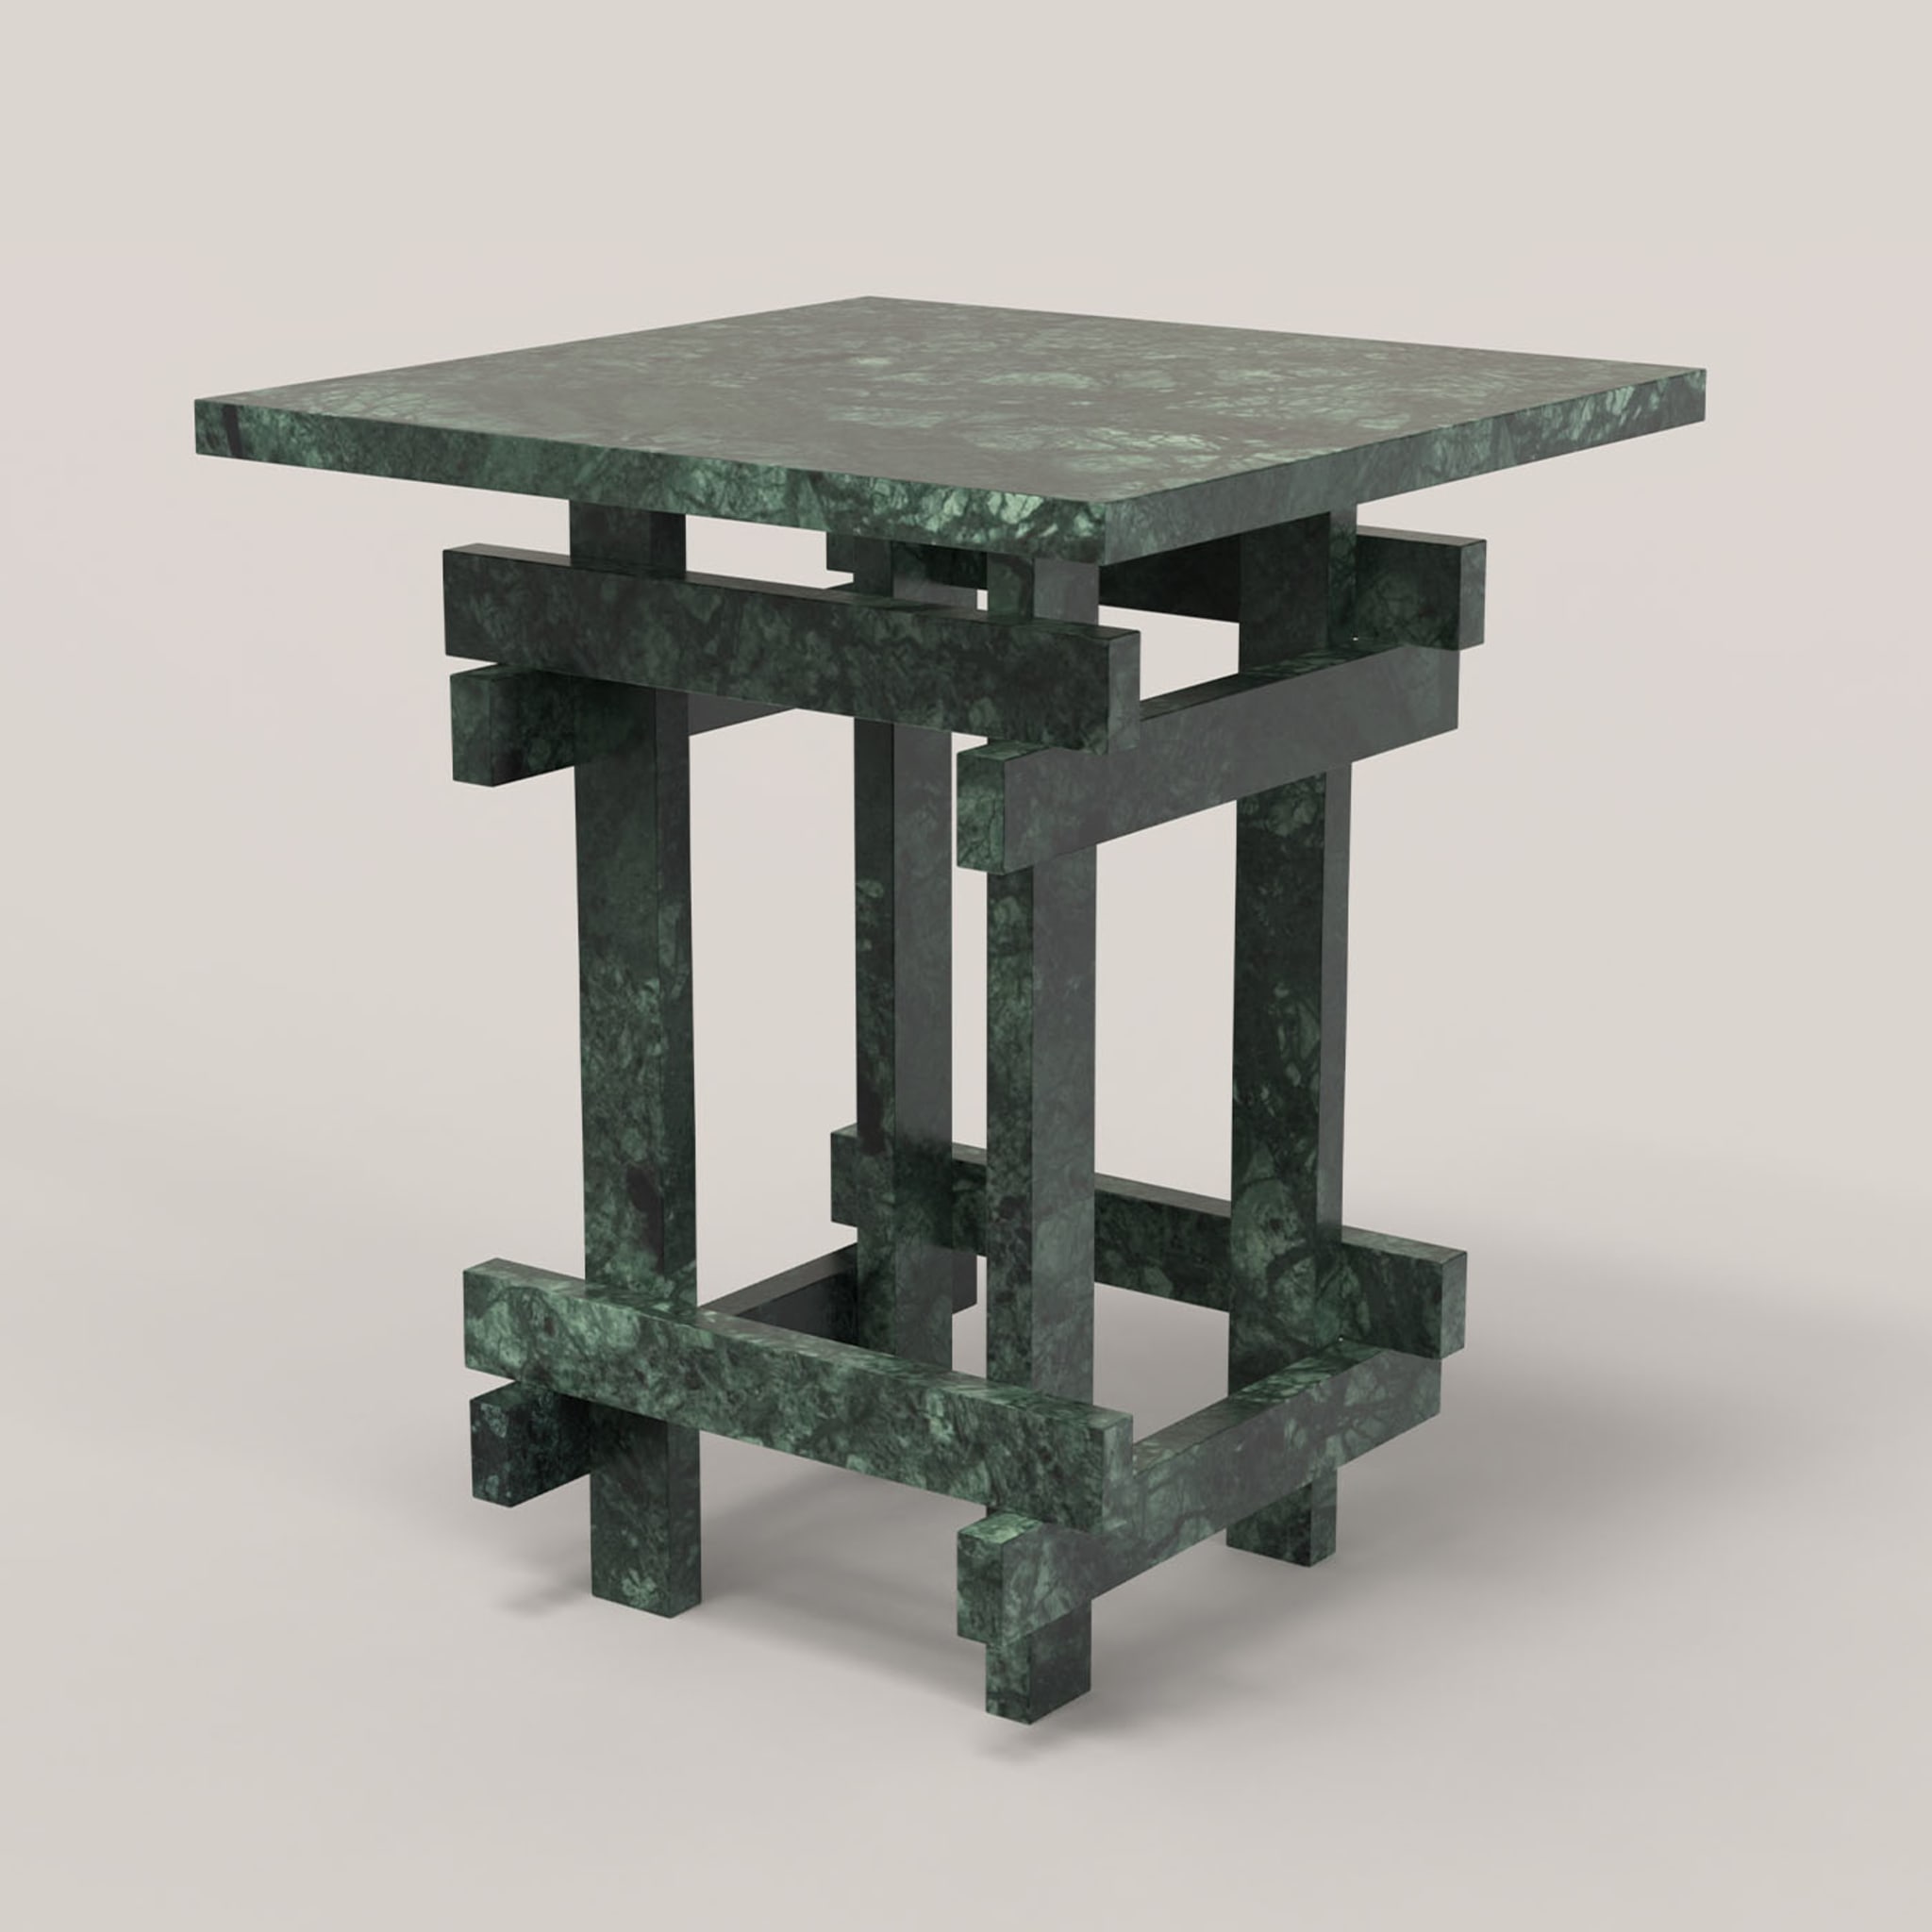 Paranoid V1 Side Table in Guatemala Marble #3 - Alternative view 5